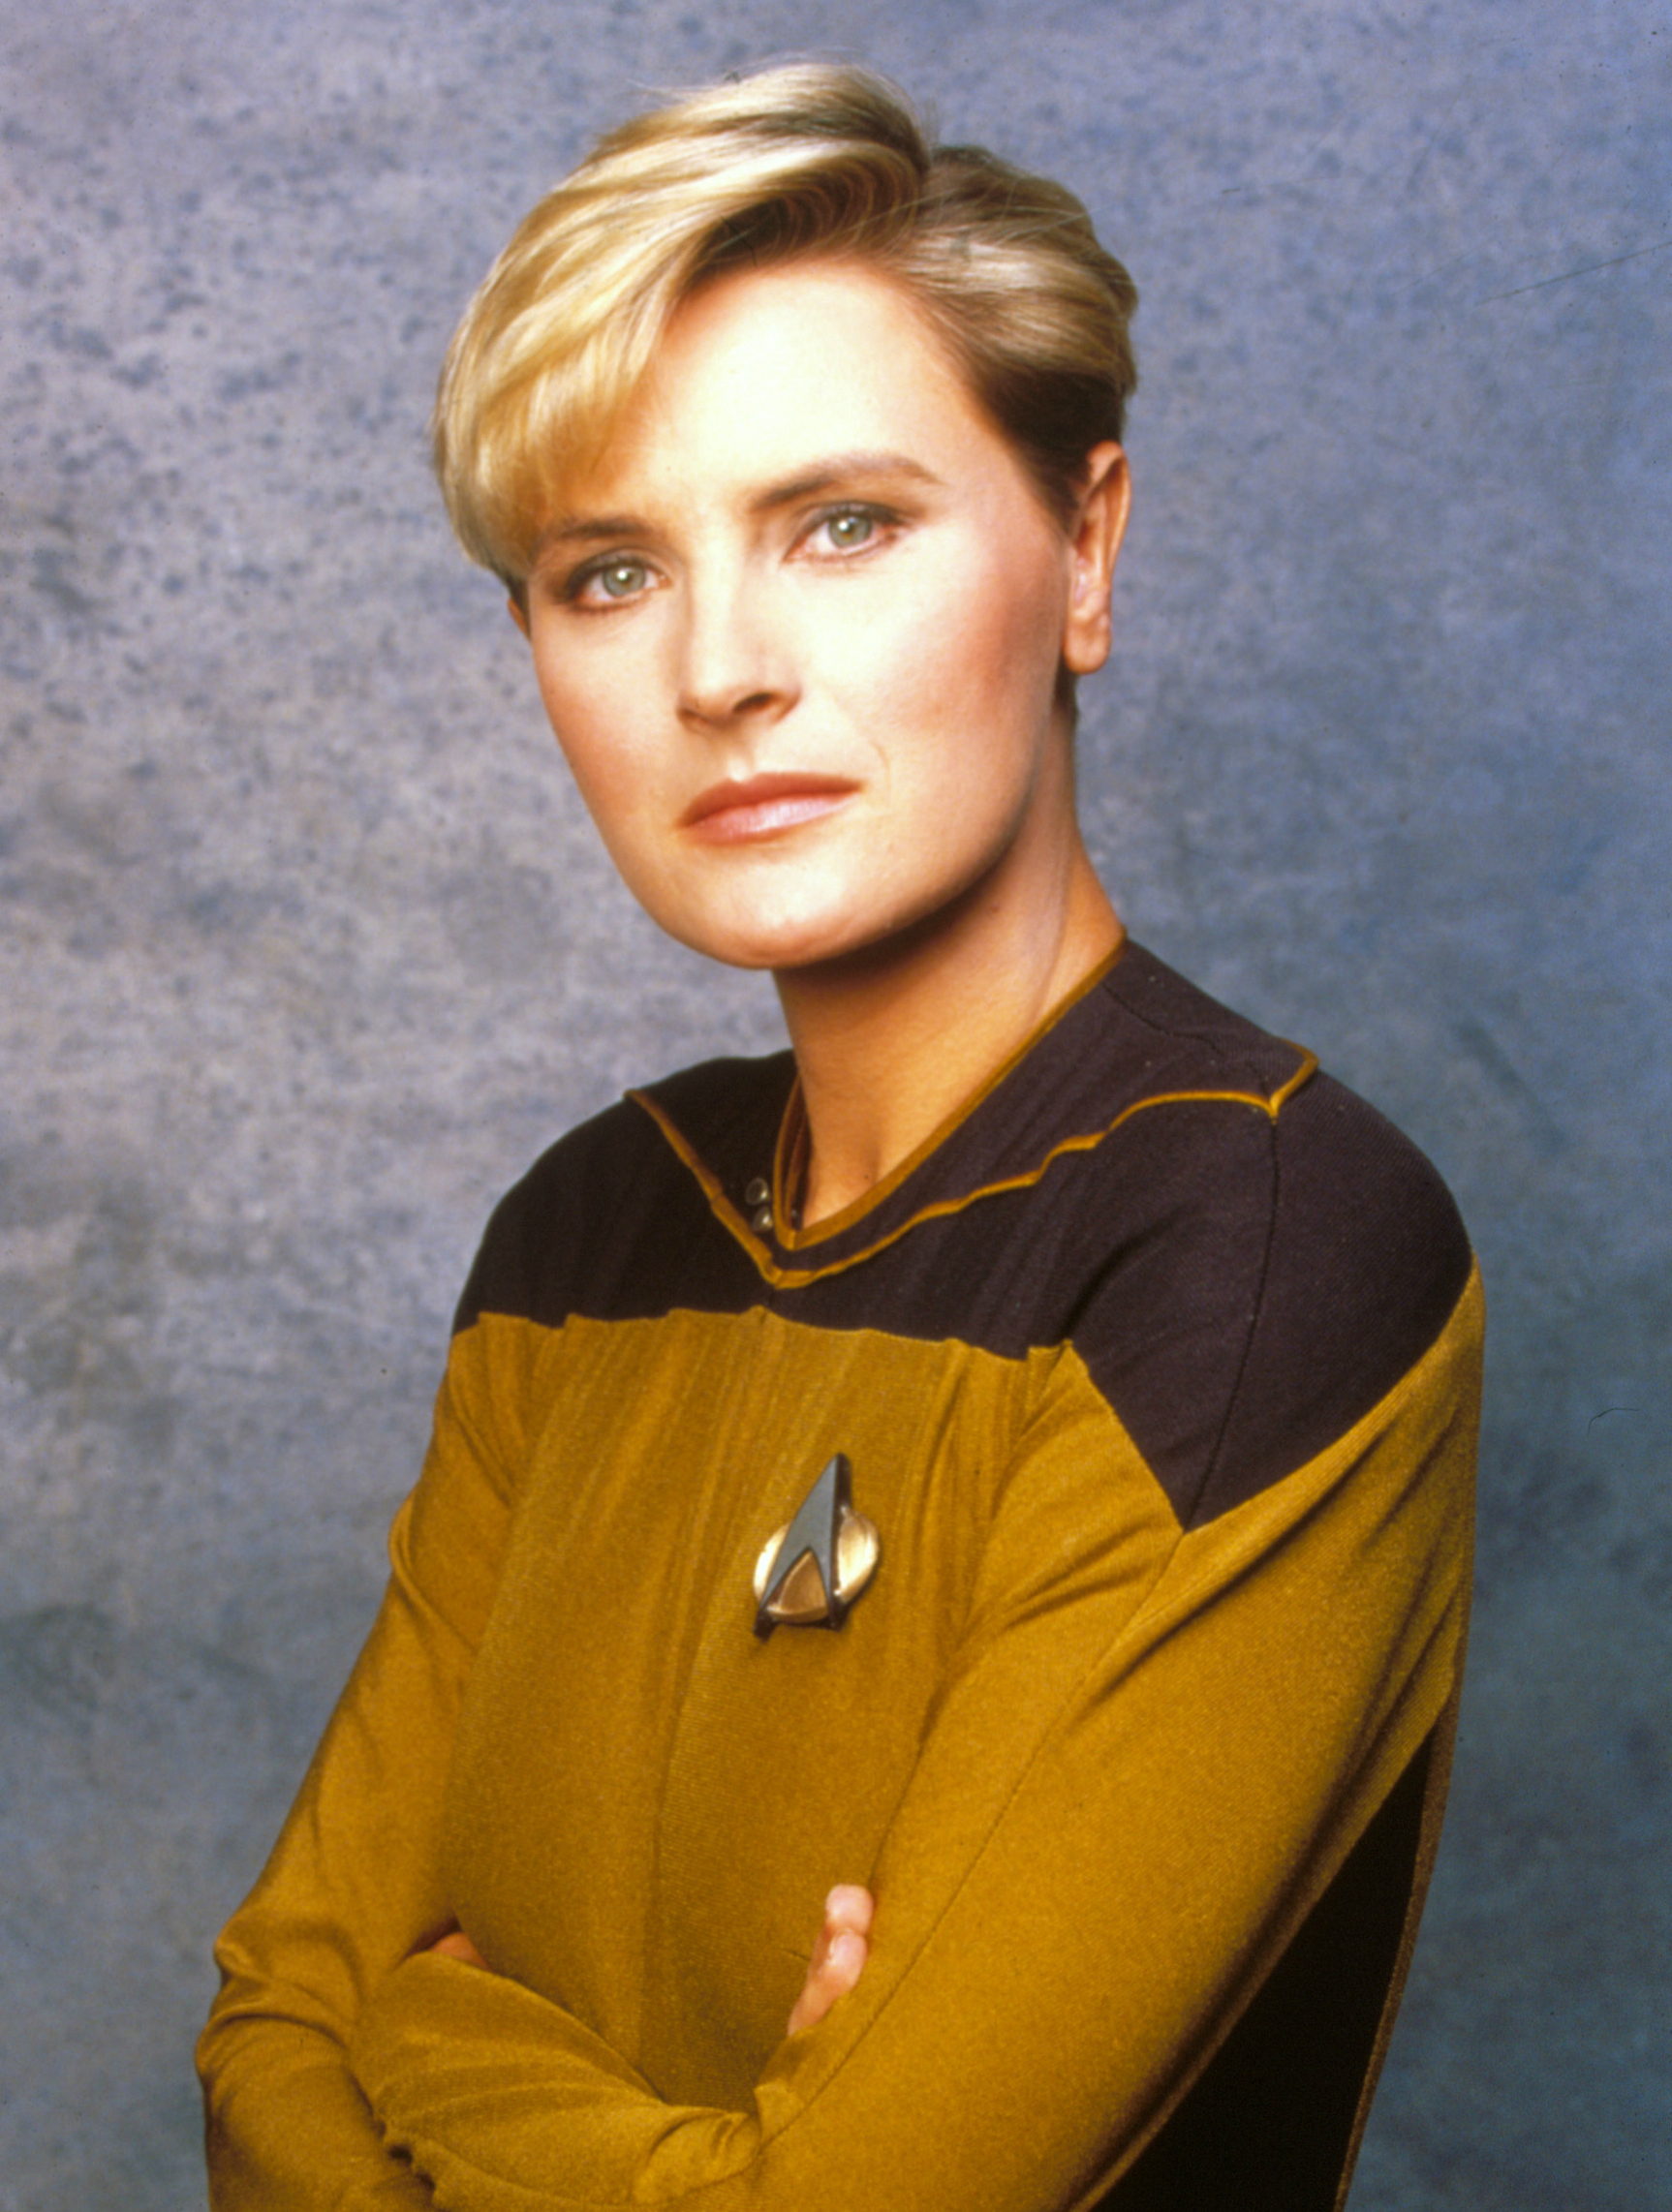 Toronto ComiCon: Denise Crosby Recalls 'TNG:' Stealing Food and Changing Clothes